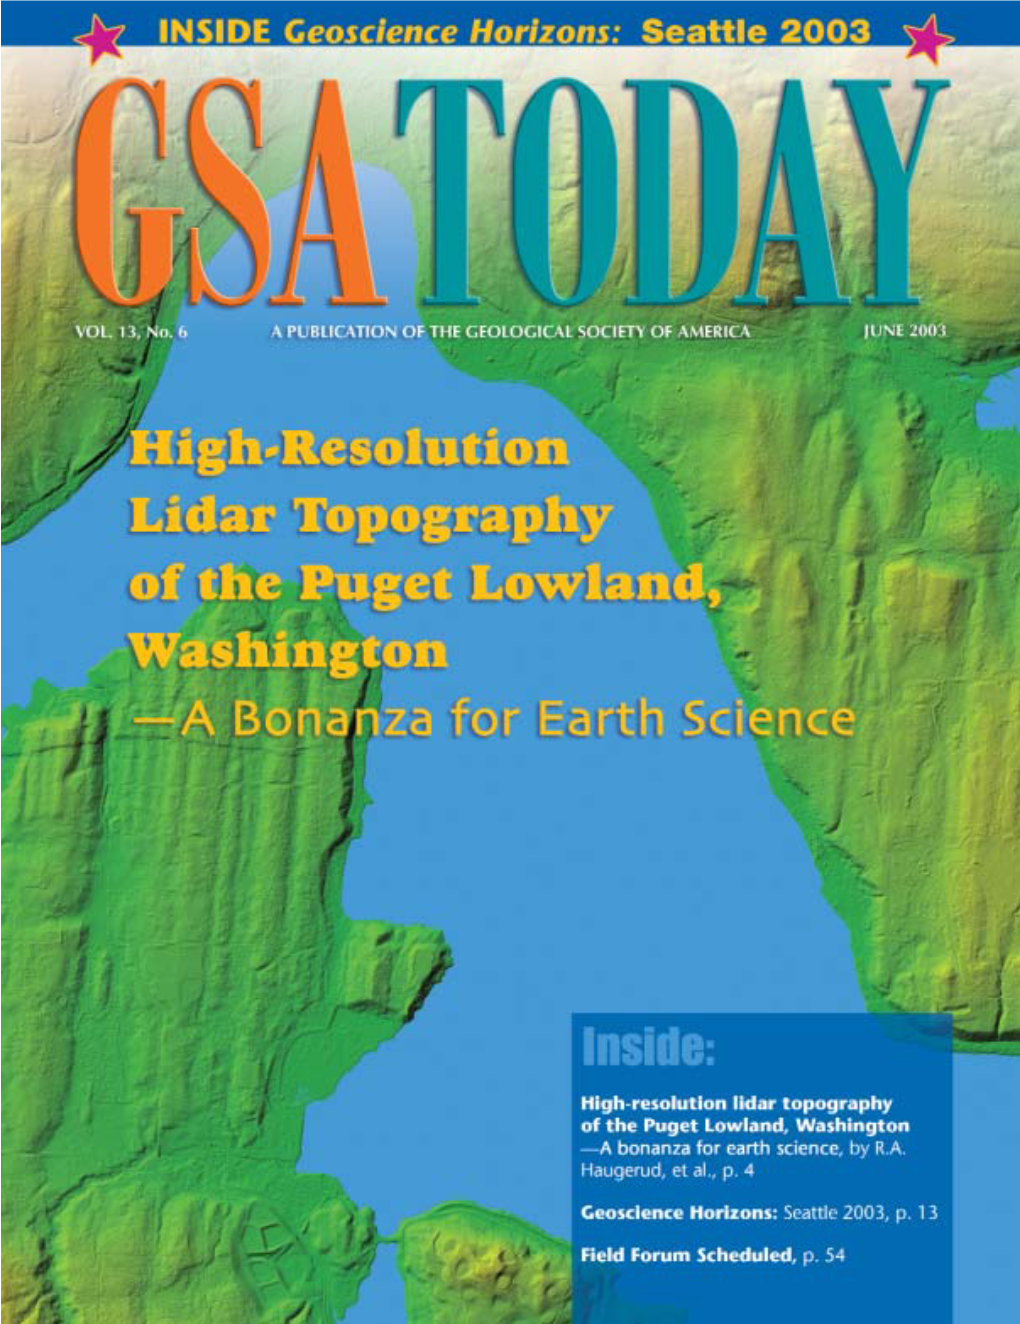 GSA Today Article: High Resolution Lidar Topography of the Puget Lowland, Washington